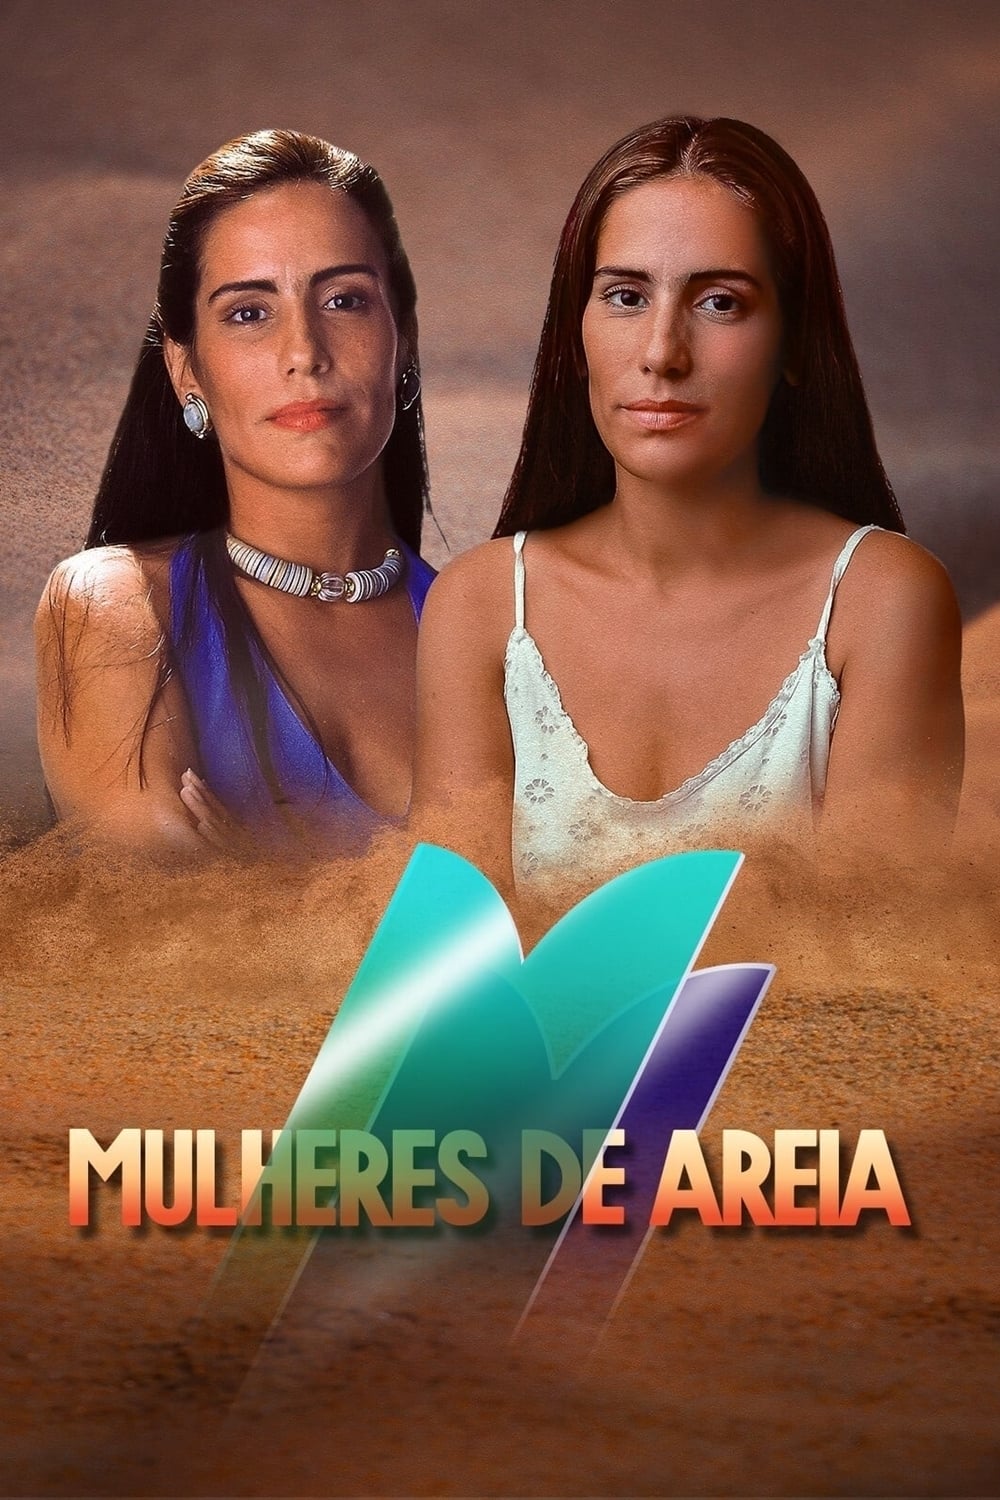 Mulheres de Areia TV Shows About Twin Sister